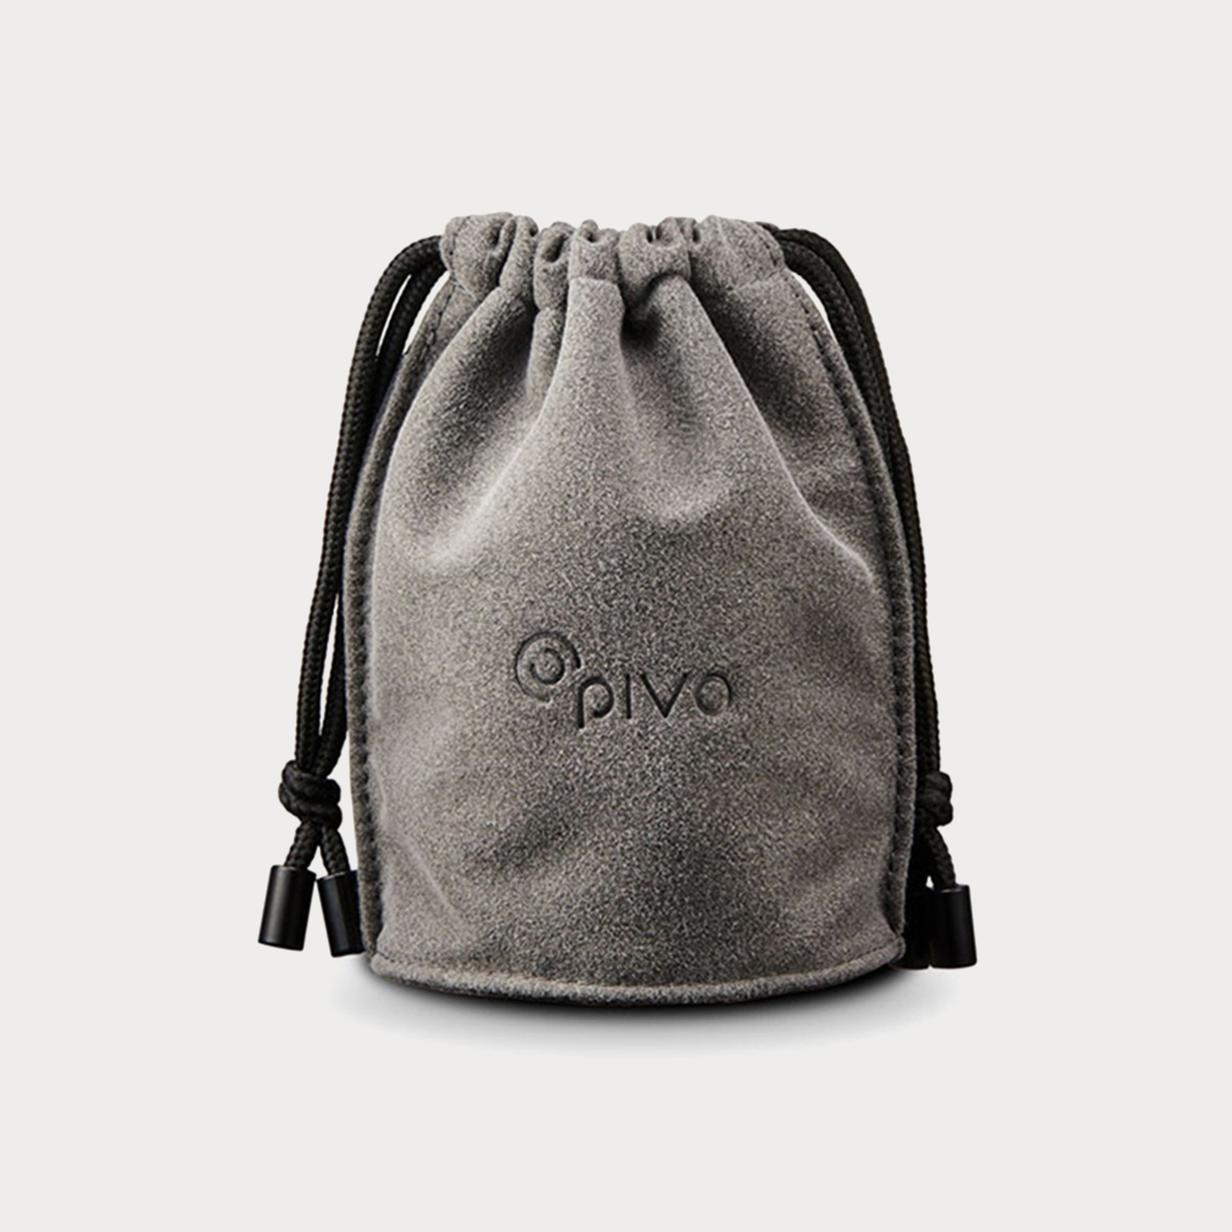 Moment Pivo TP Travel Pouch gray 01